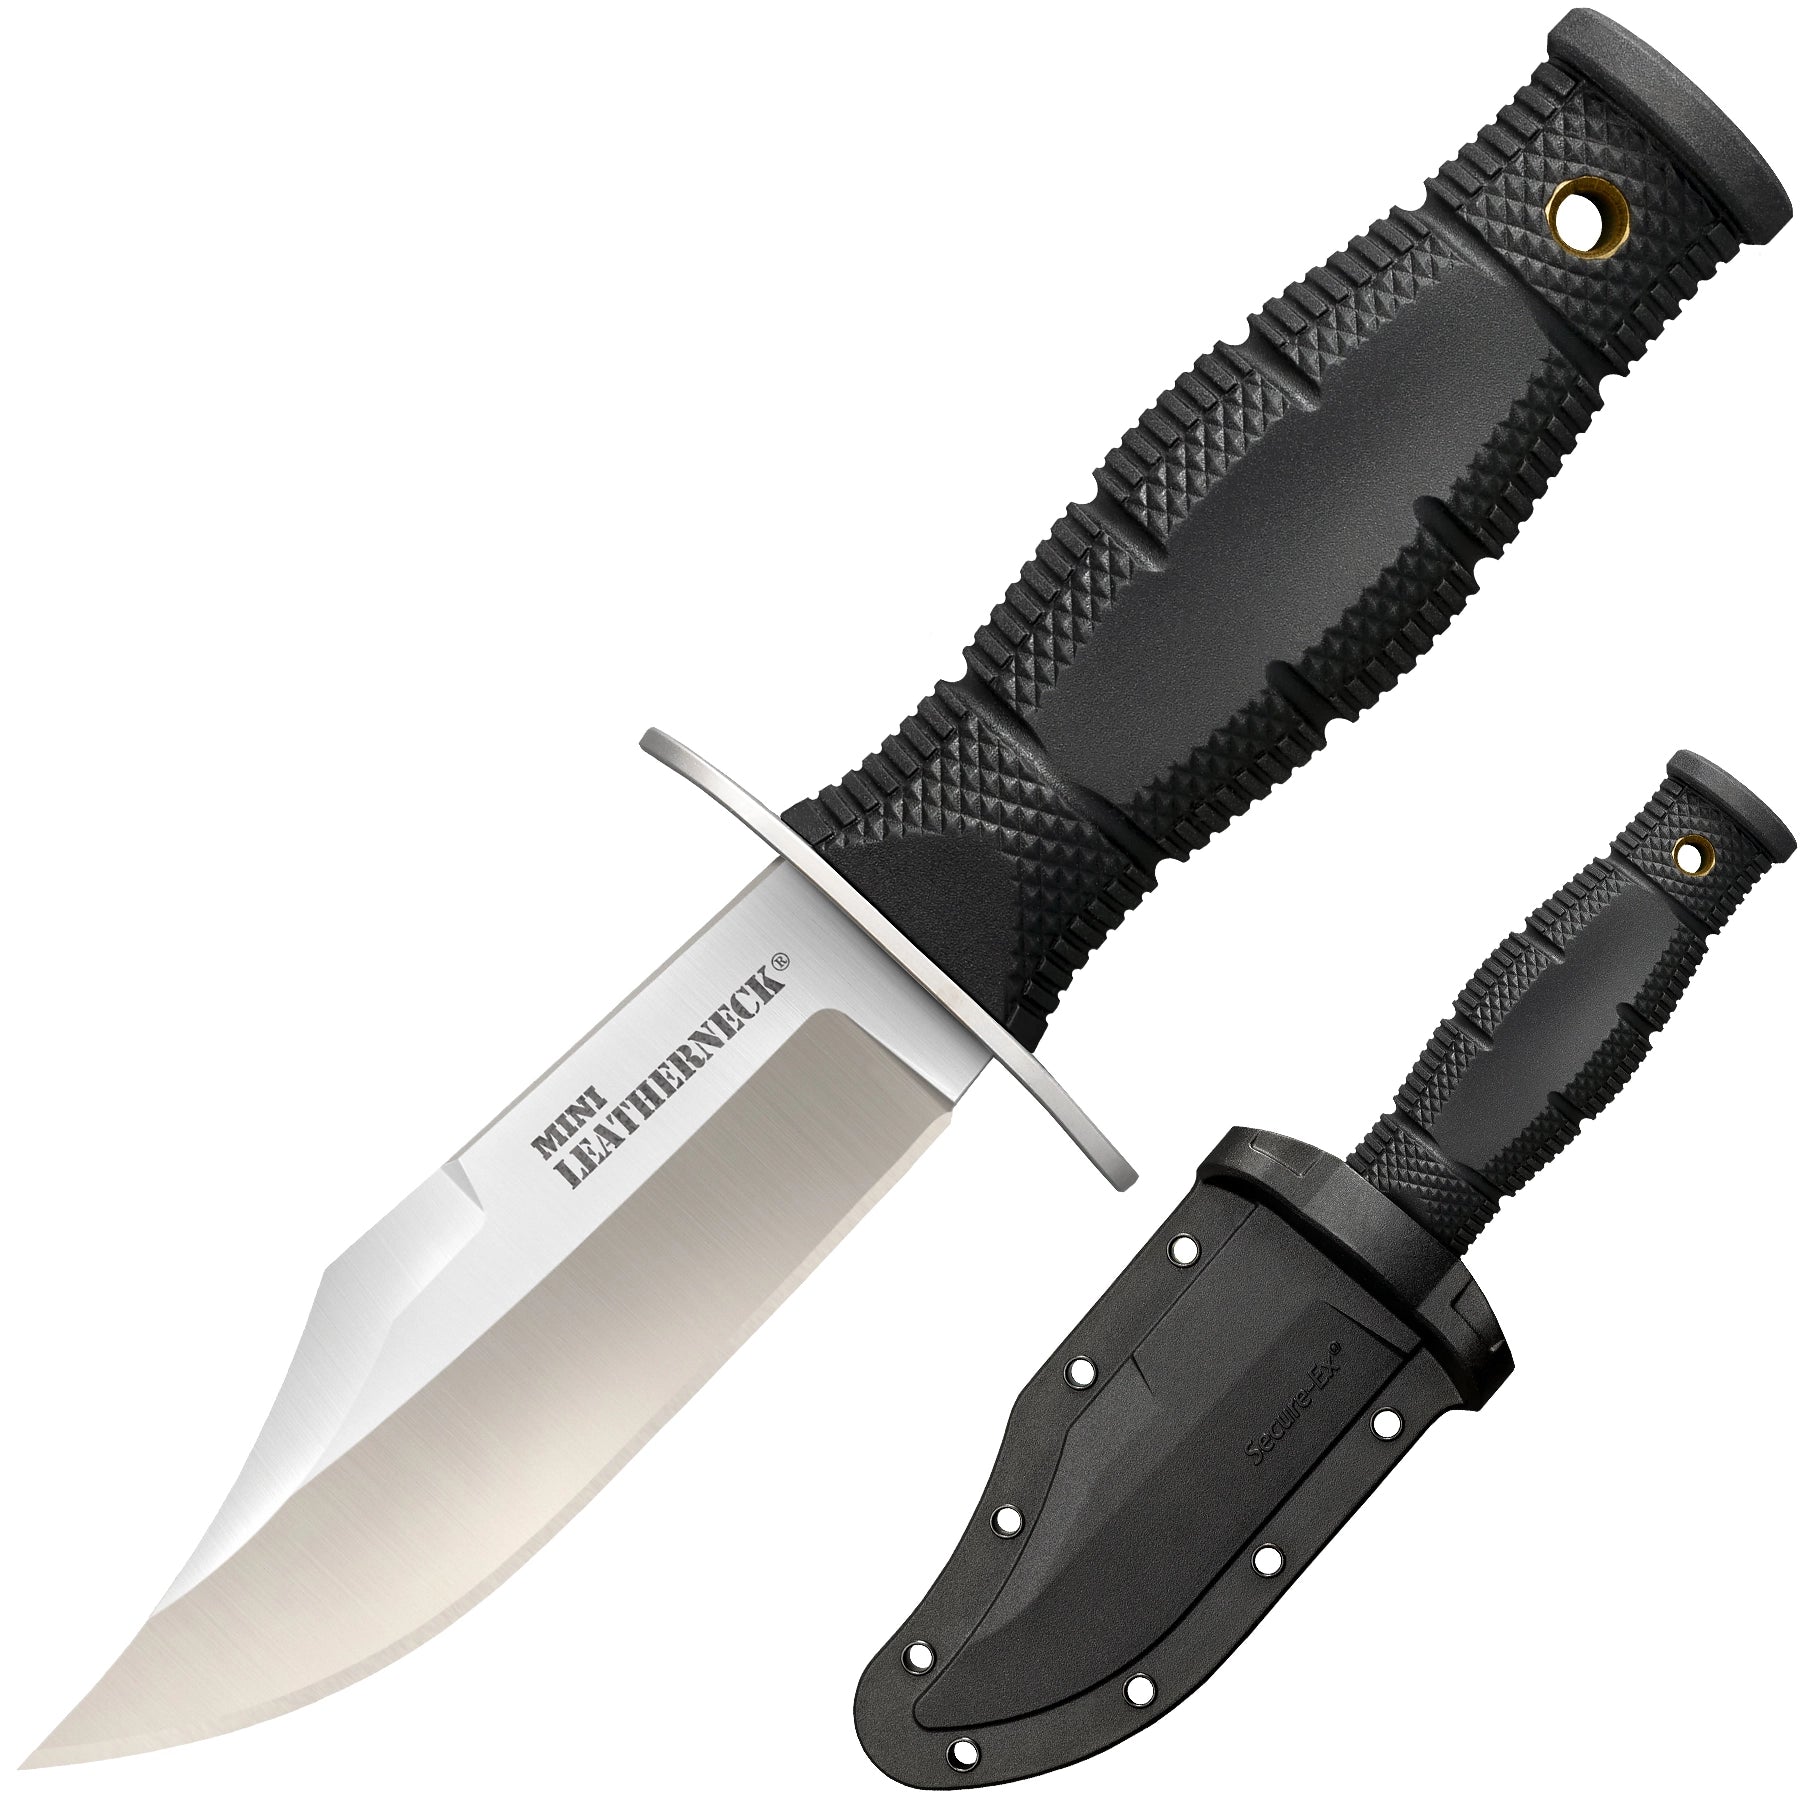 Cold Steel Mini Leatherneck Fixed Blade Knife – Clip Point